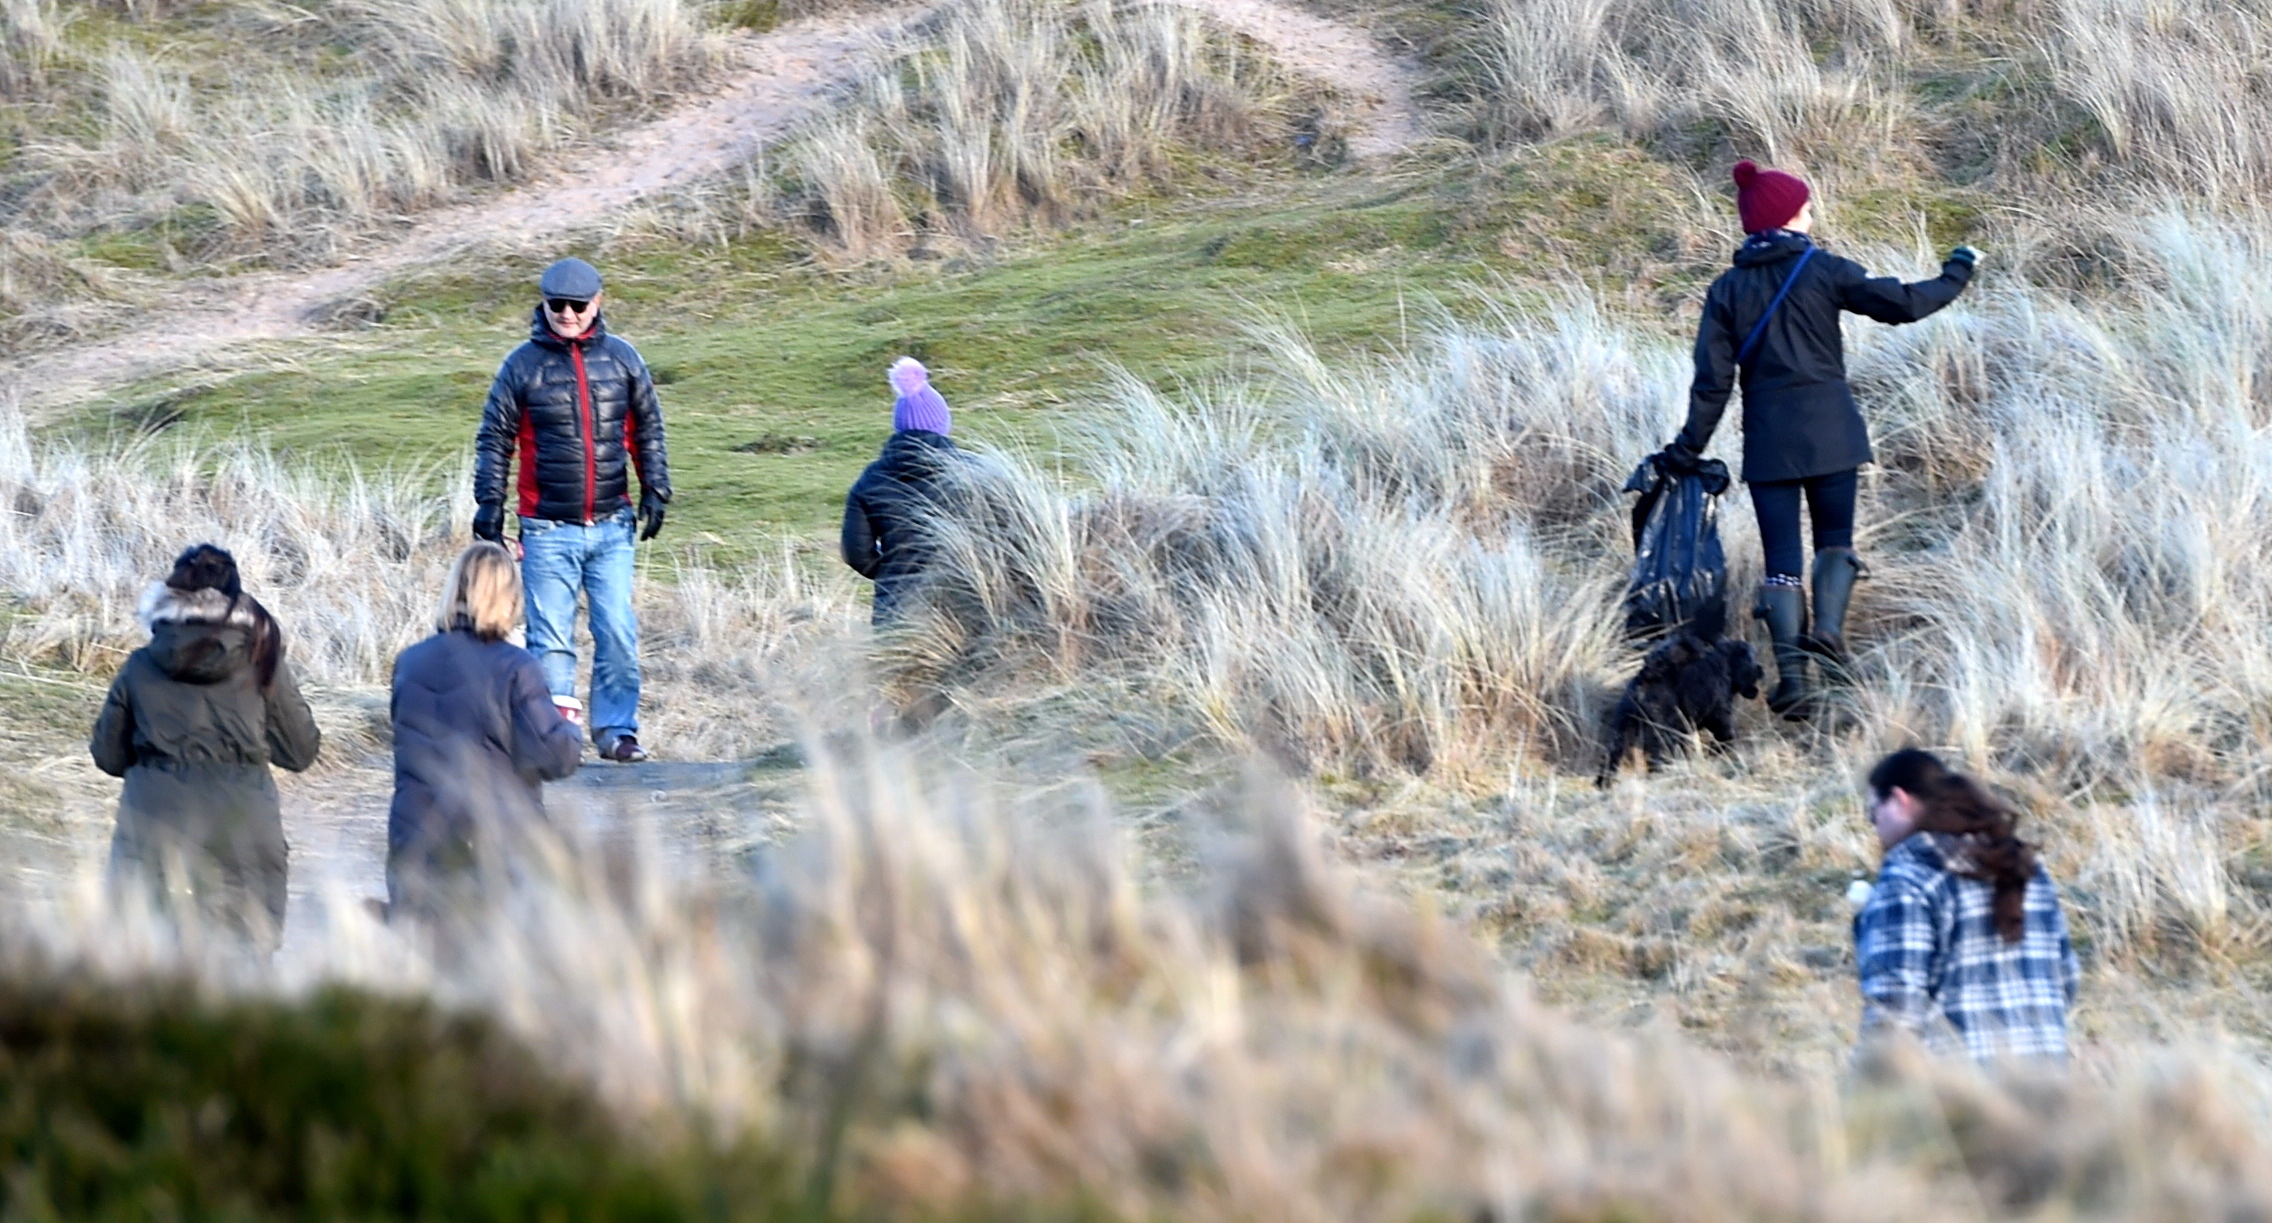 A clean-up at the Balmedie Country Park beach area earlier this year.
Picture by Jim Irvine.